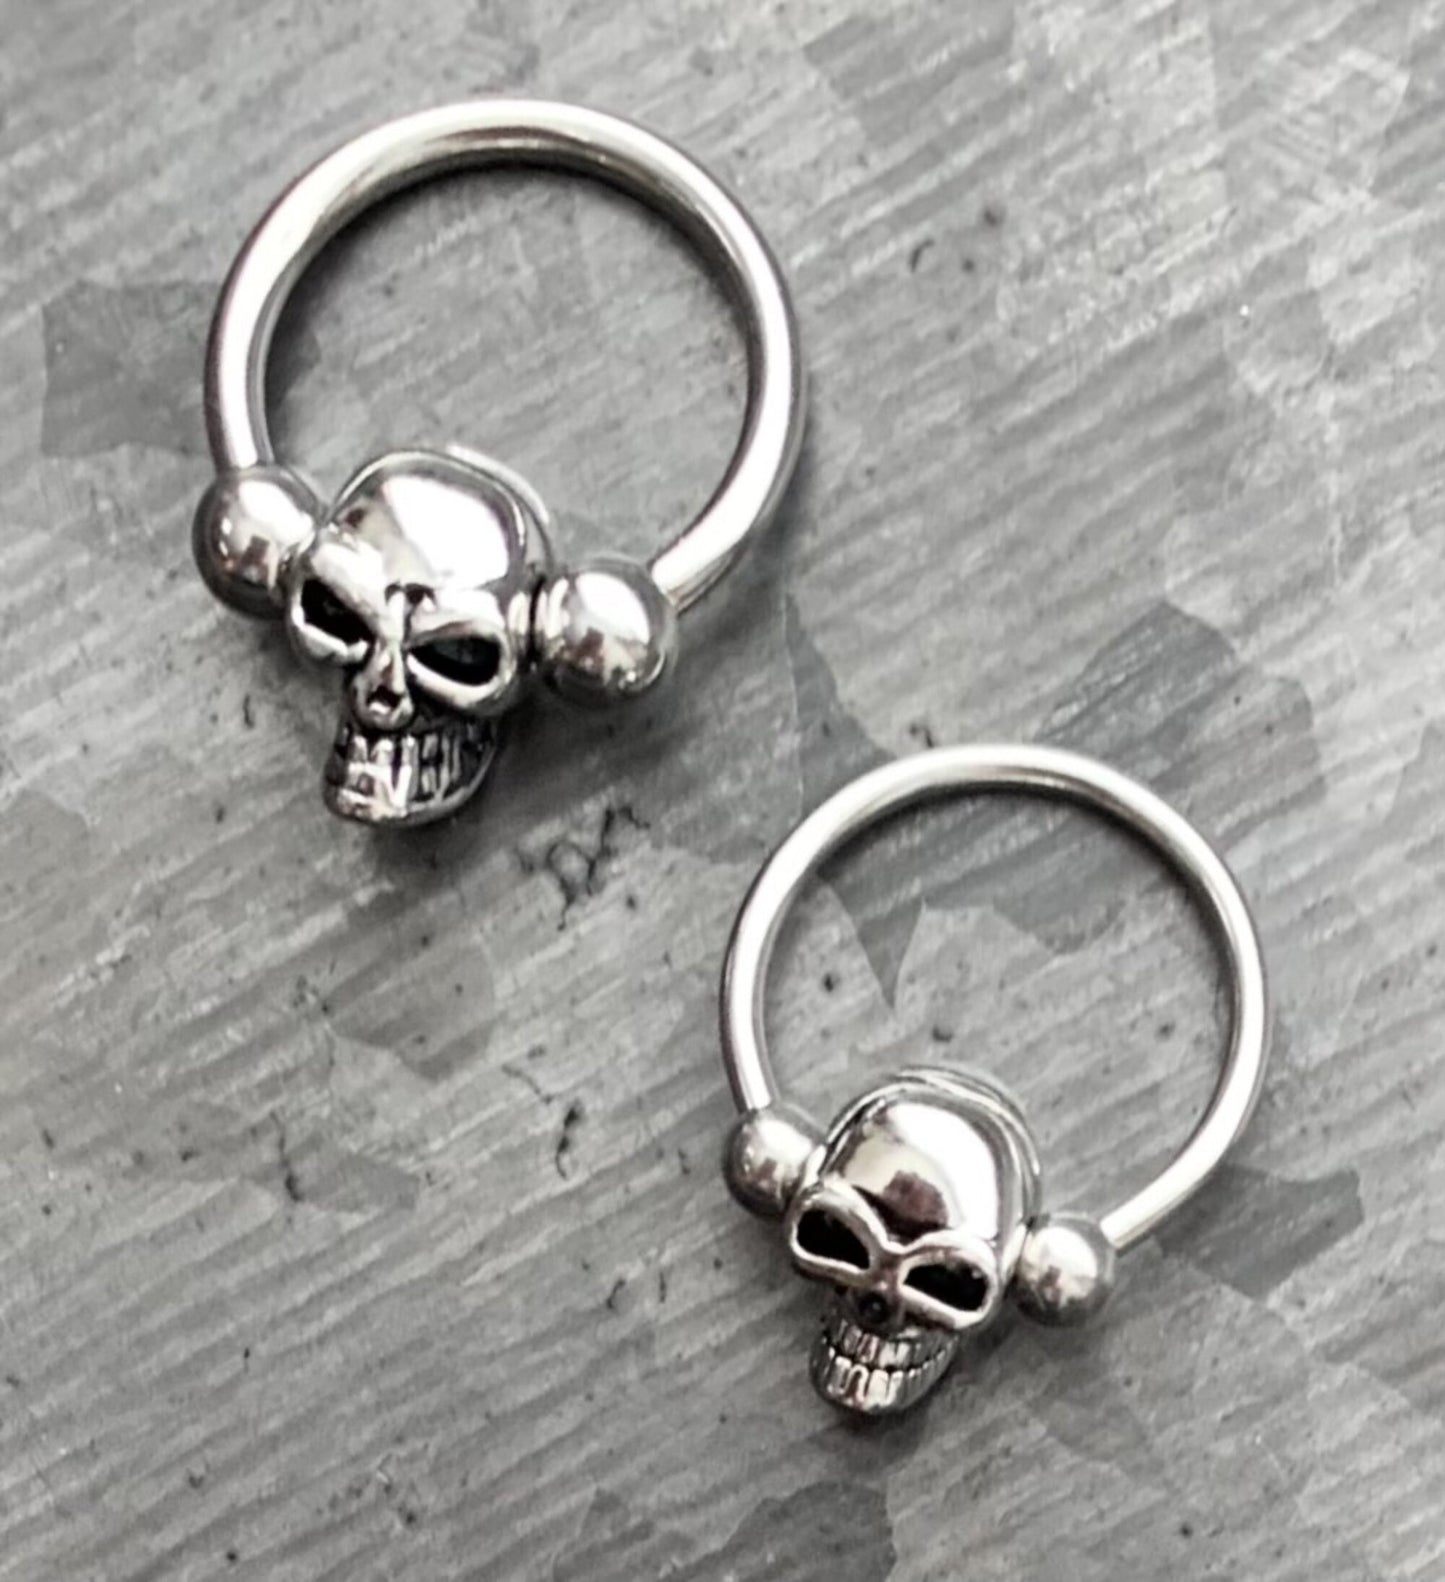 1 Piece Unique Skull 316L Surgical Steel Captive Bead Ring / Circular Barbell - Gauges 14g or 16g with a 1/2" internal diameter!